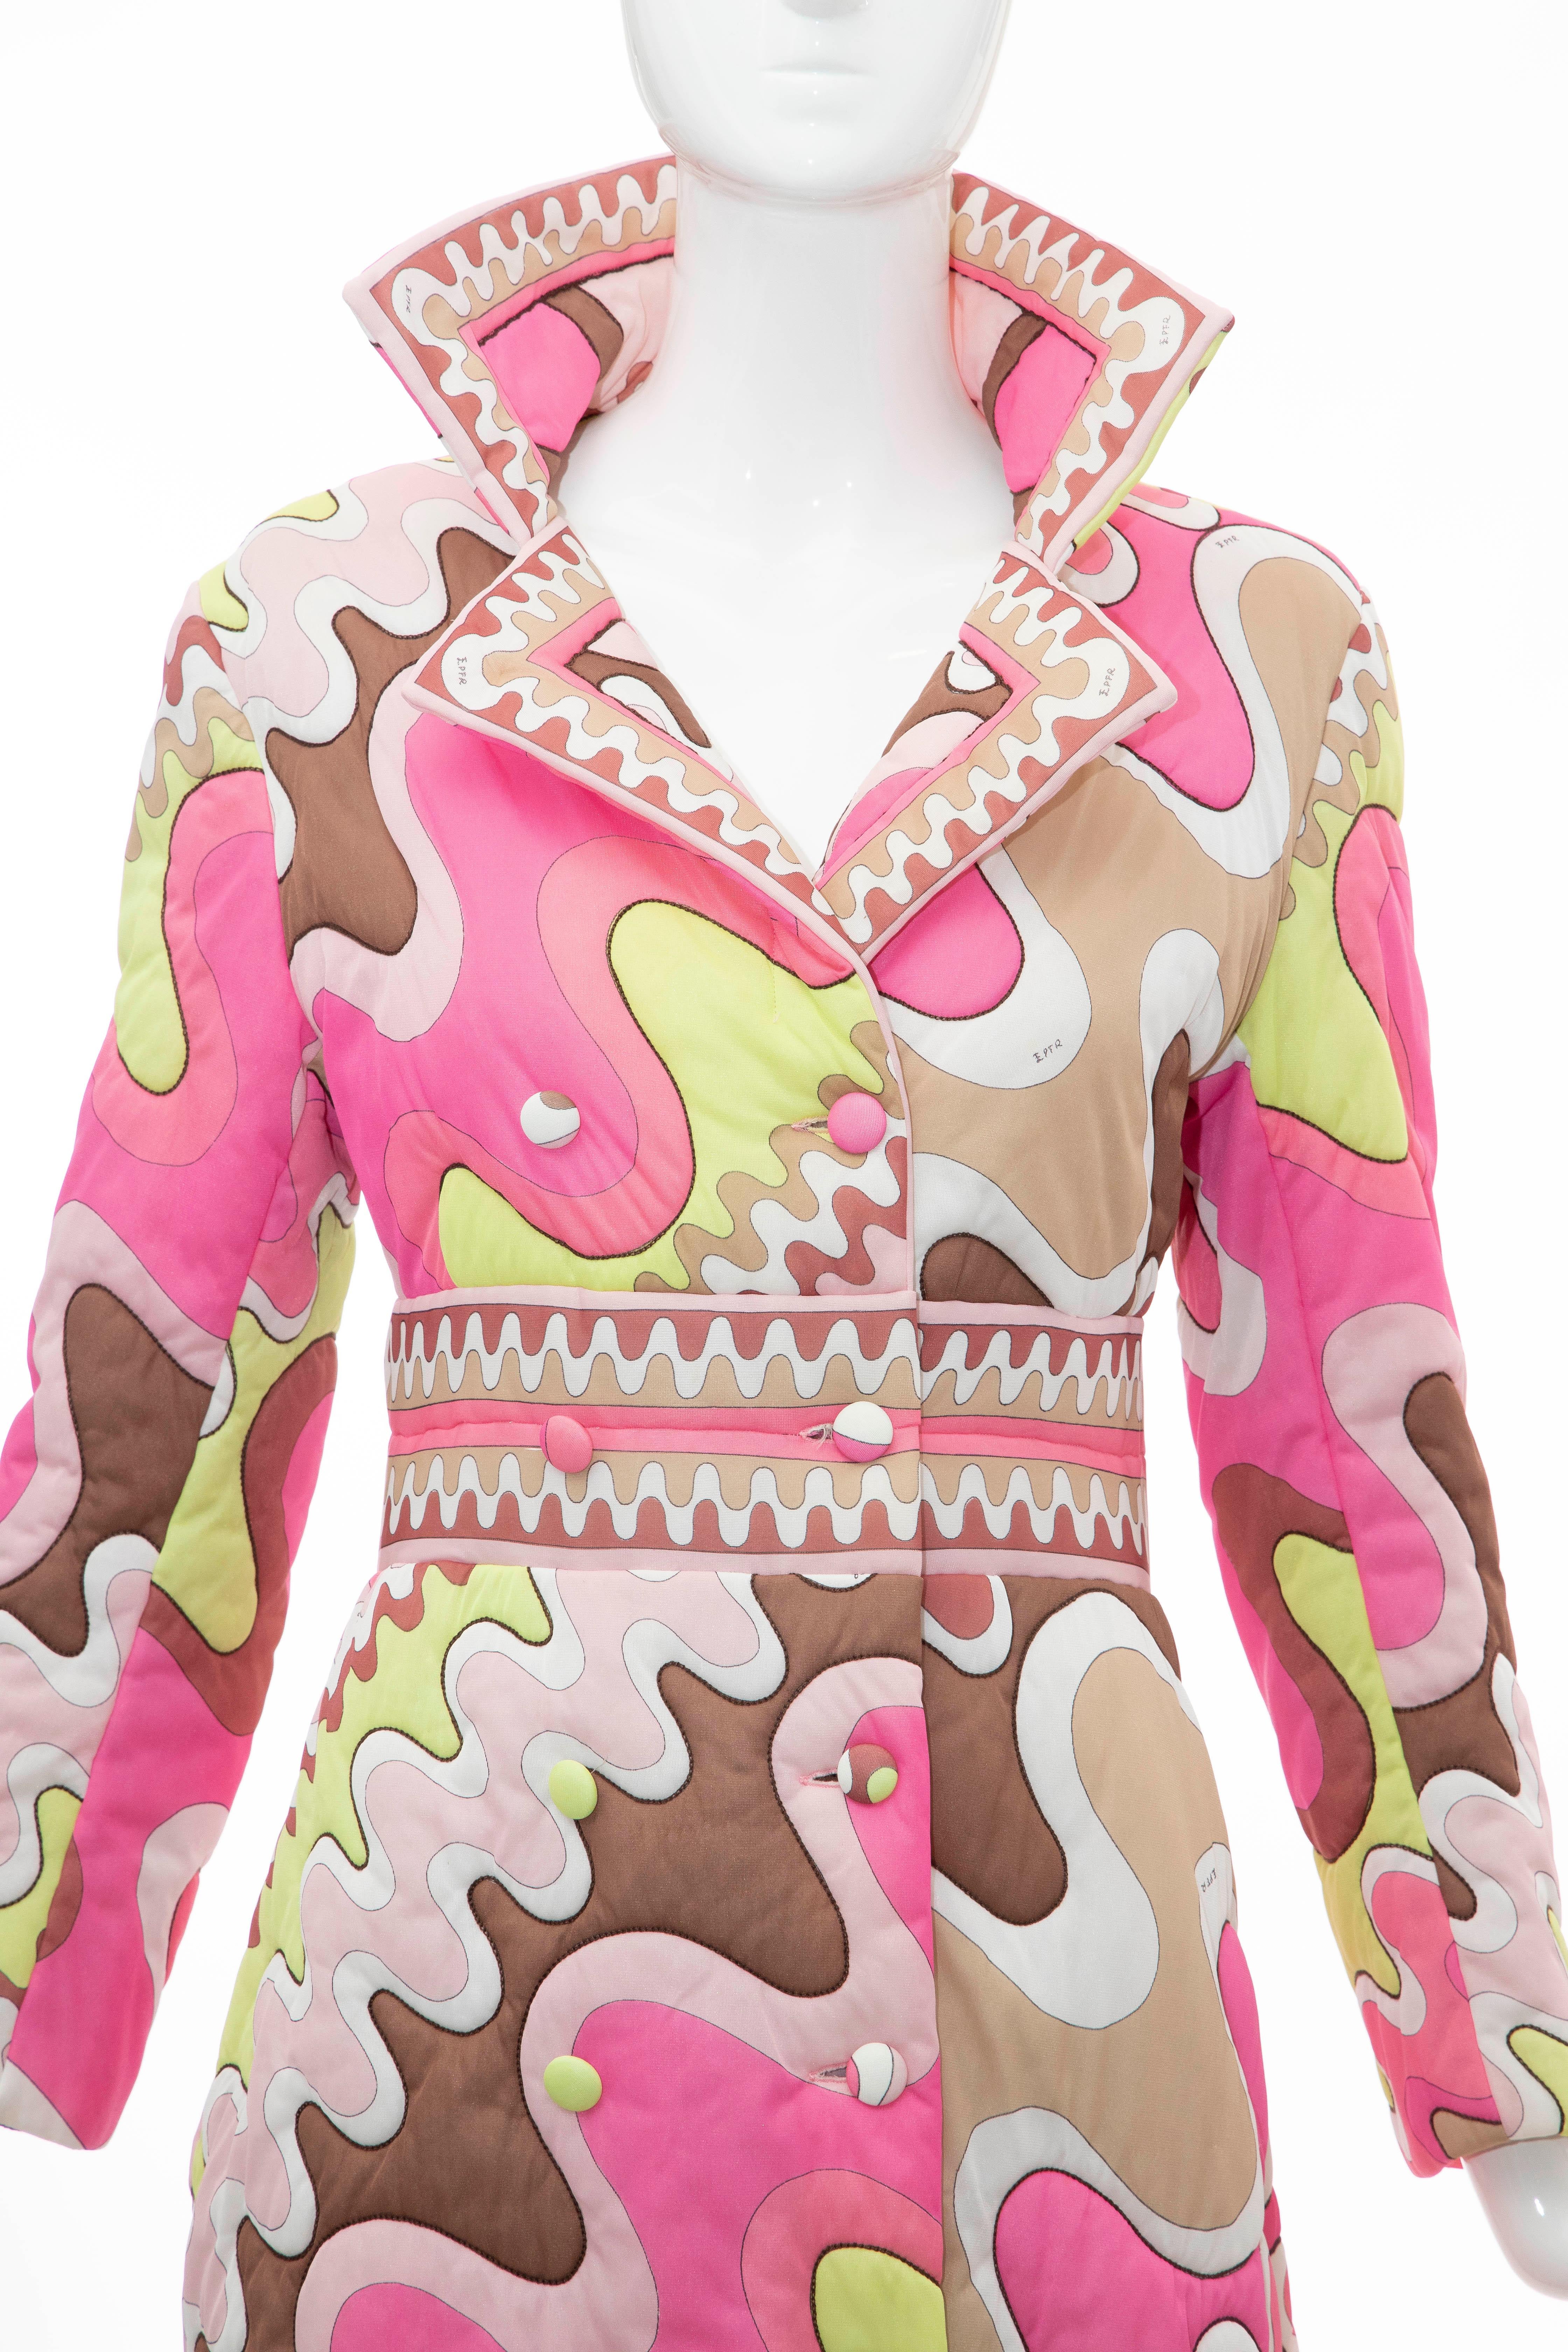 Emilio Pucci Double-Breasted Abstract Print Quilted Coat, Circa: 1970's (Braun)